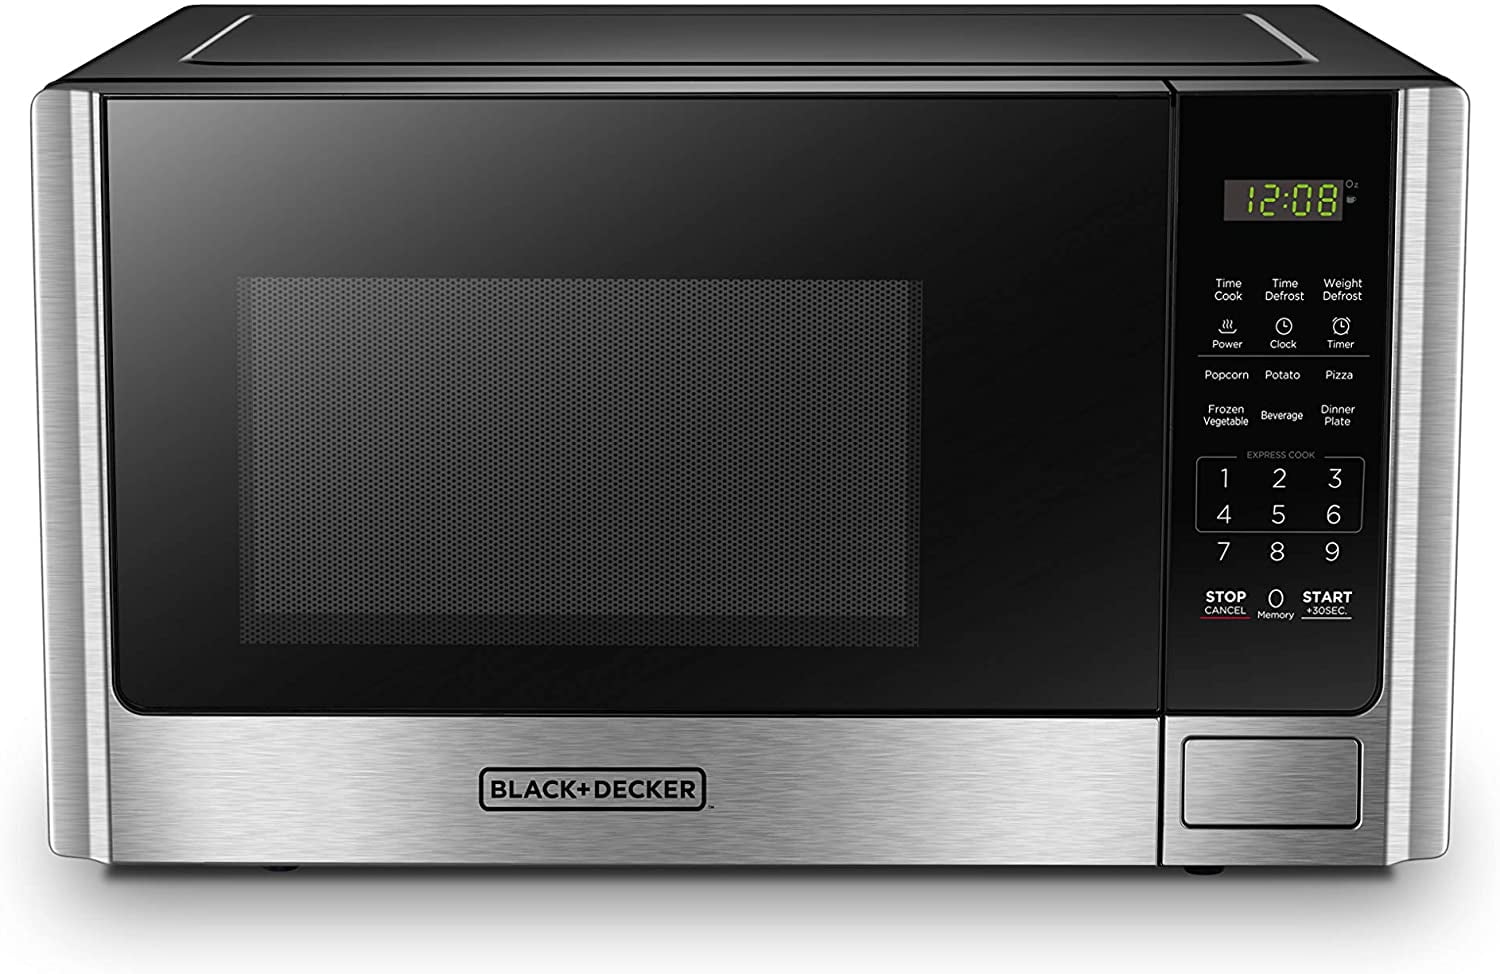 Black Digital Microwave and Grill, Electricals